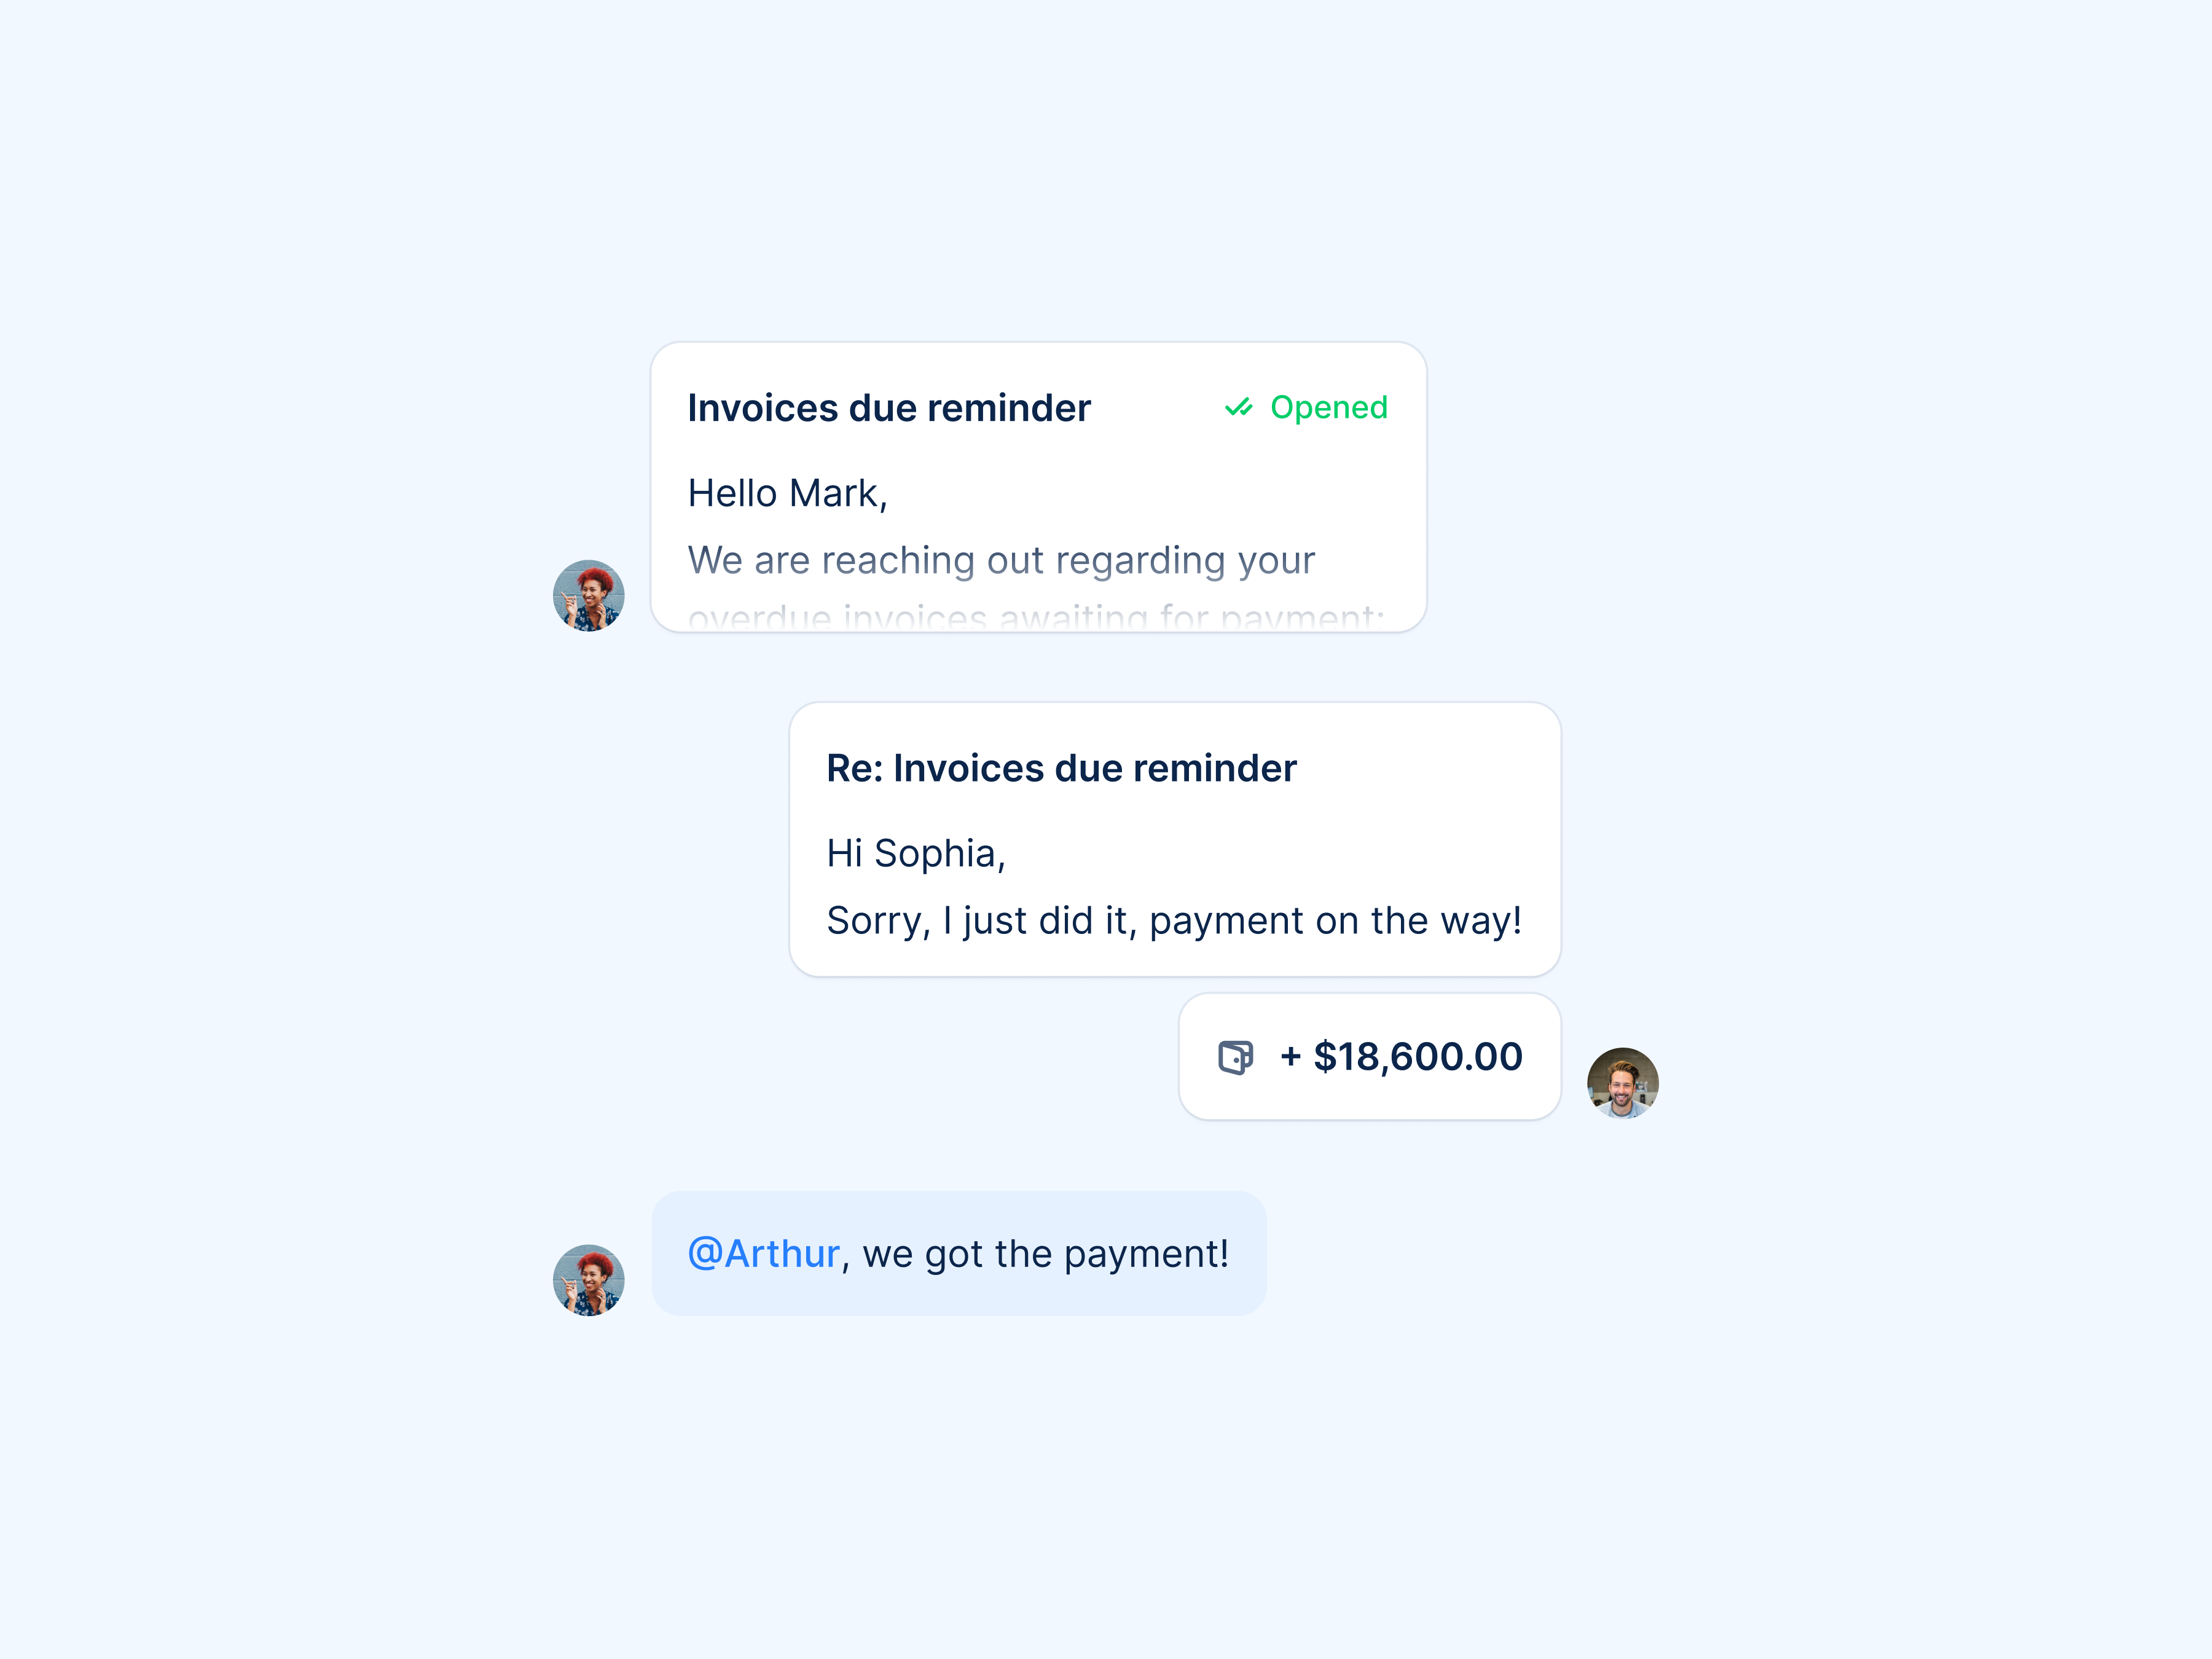 Empower collaboration. Let your finance and business teams communicate successfully. You can personalize you collection process up to the account level.